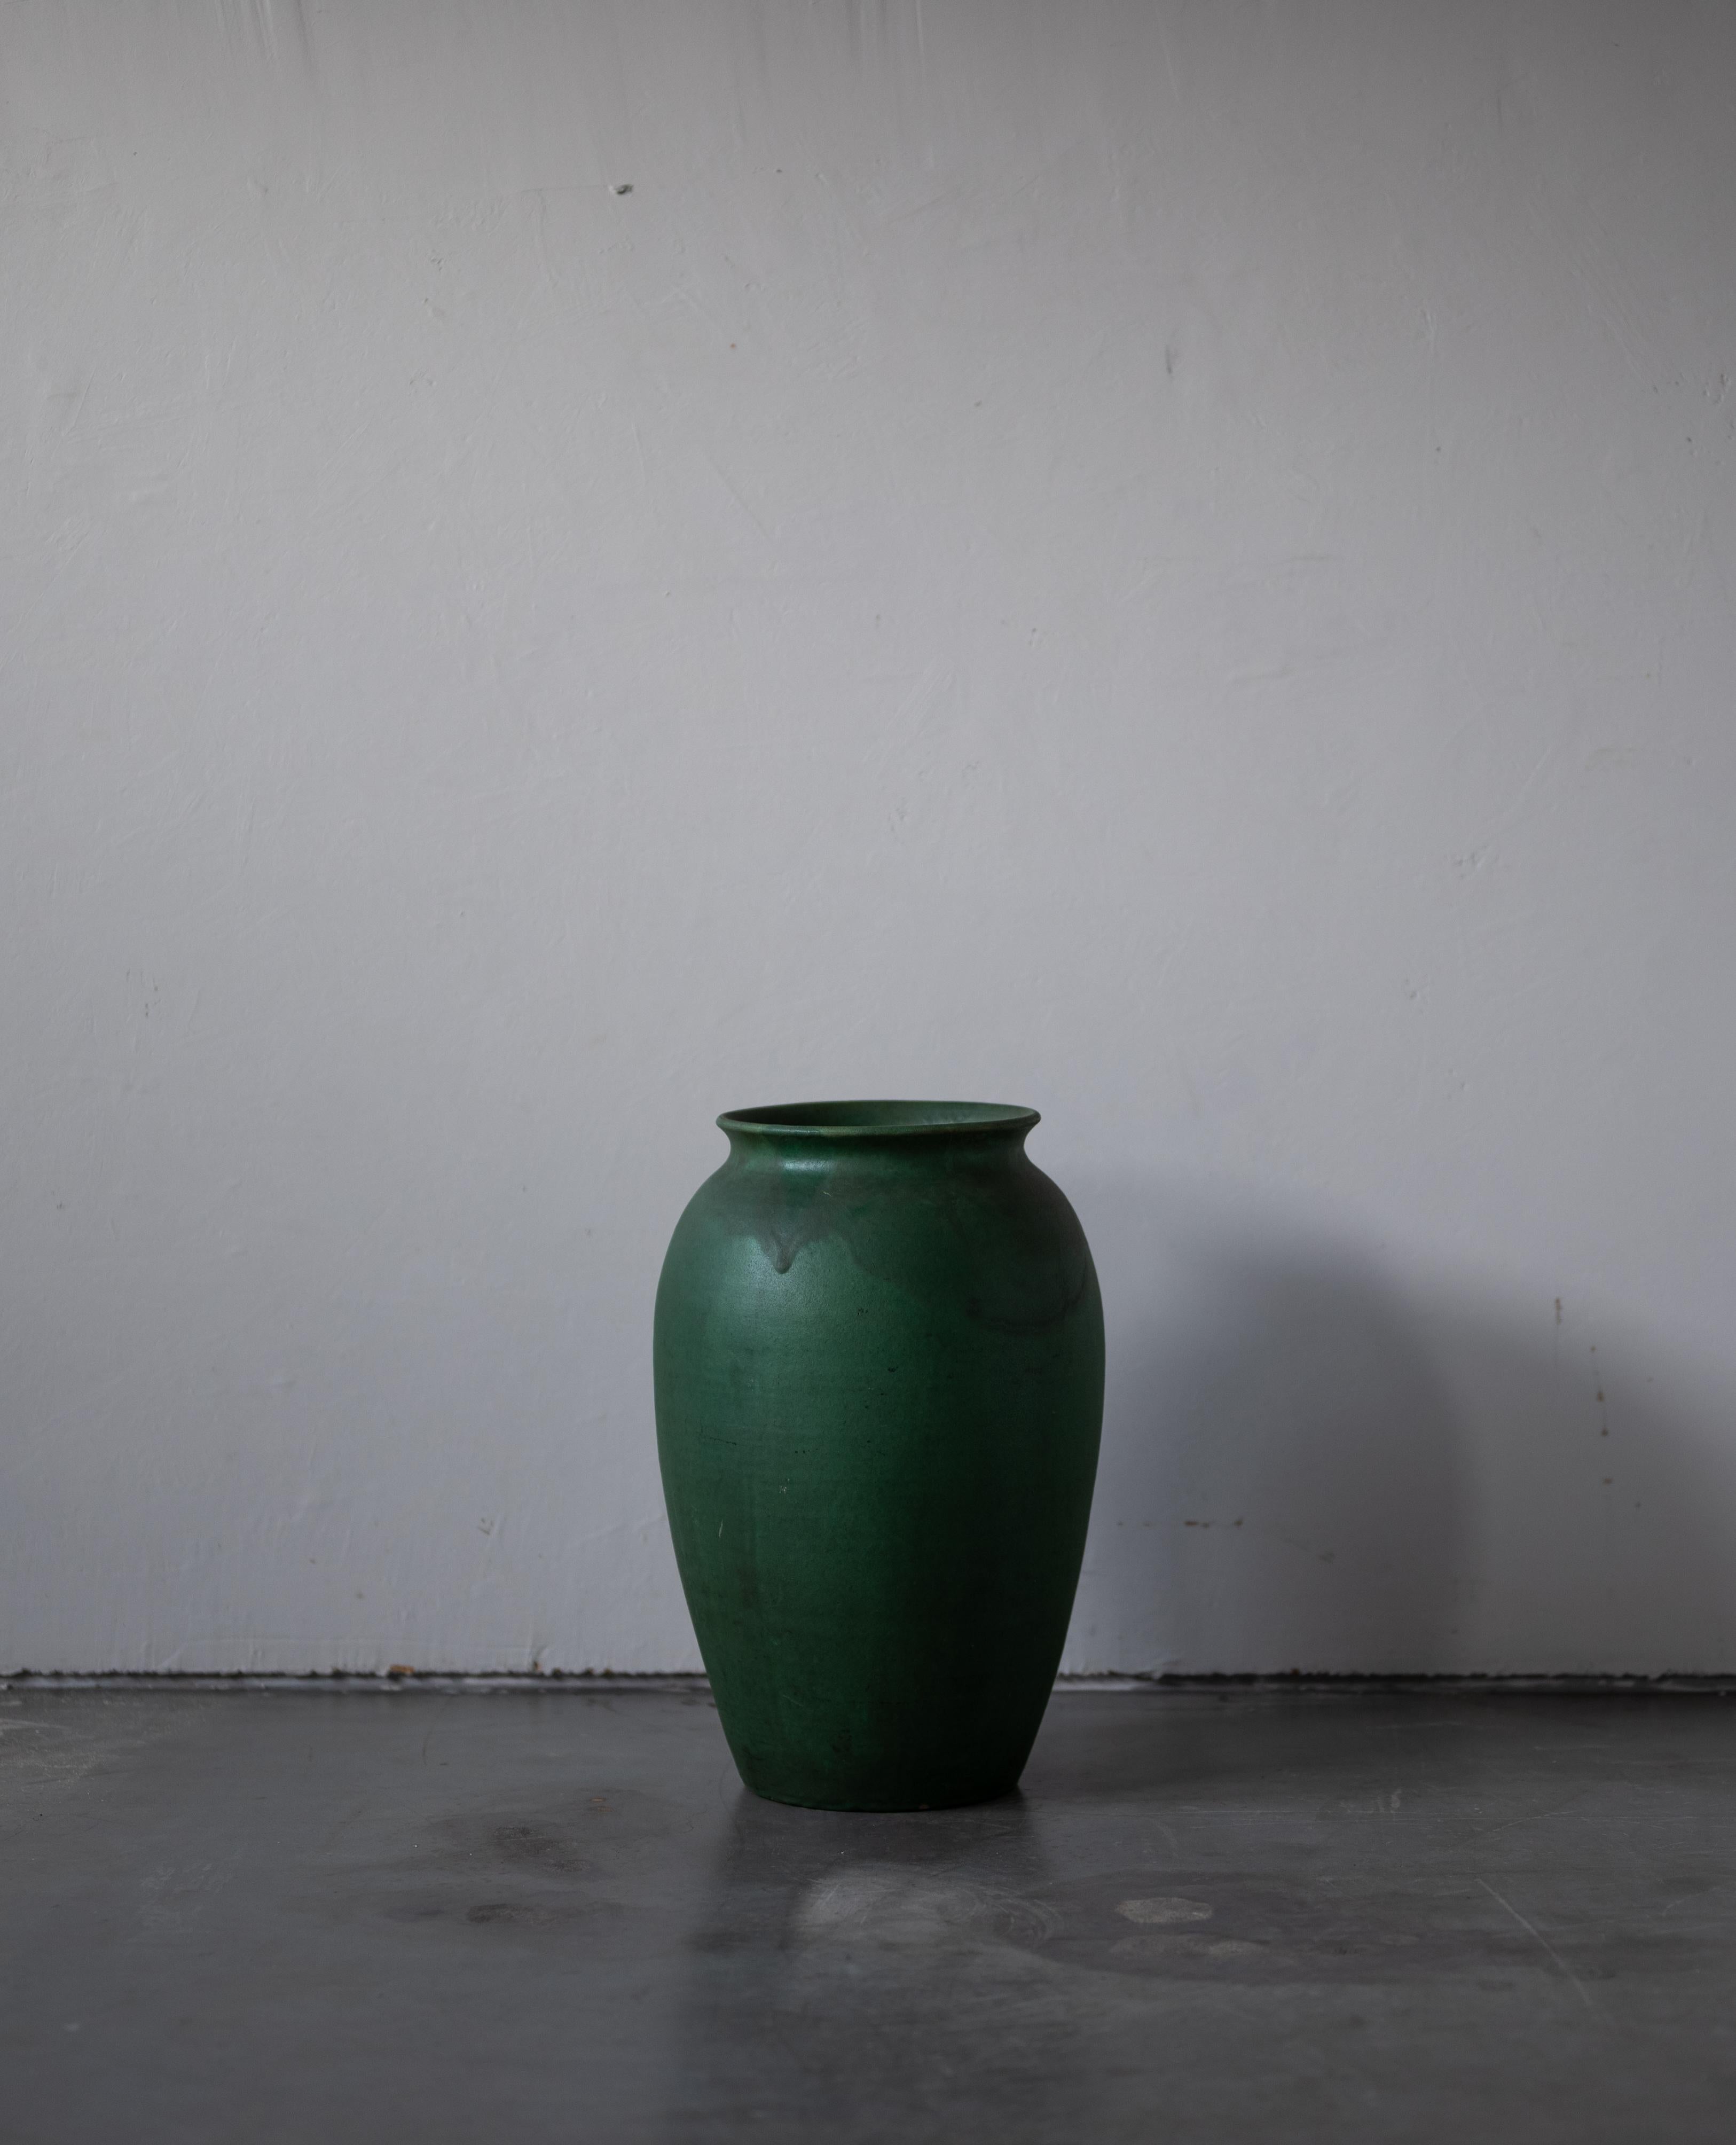 A very large vase. Designed and produced by Herman Kähler. Signed HAK. 

As is Kählers signature, the clay was sourced on the island of Bornholm. On this vase, a green glaze has been applied.

Kähler is an important ceramicist known for his